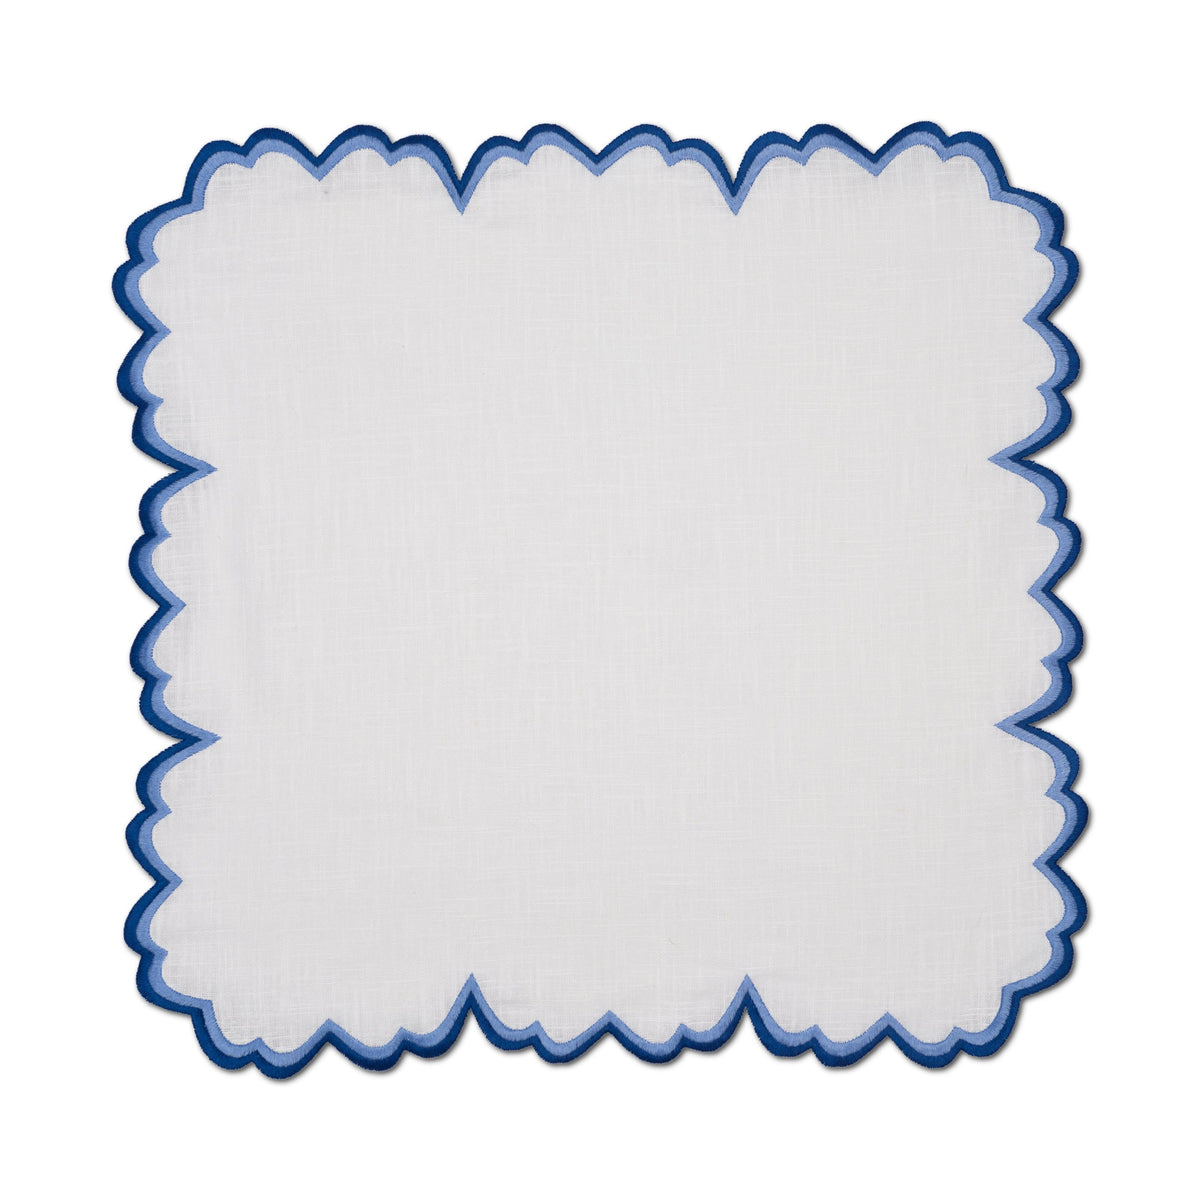 Izzy Ombre Napkin in Duo Blue, Set of 4